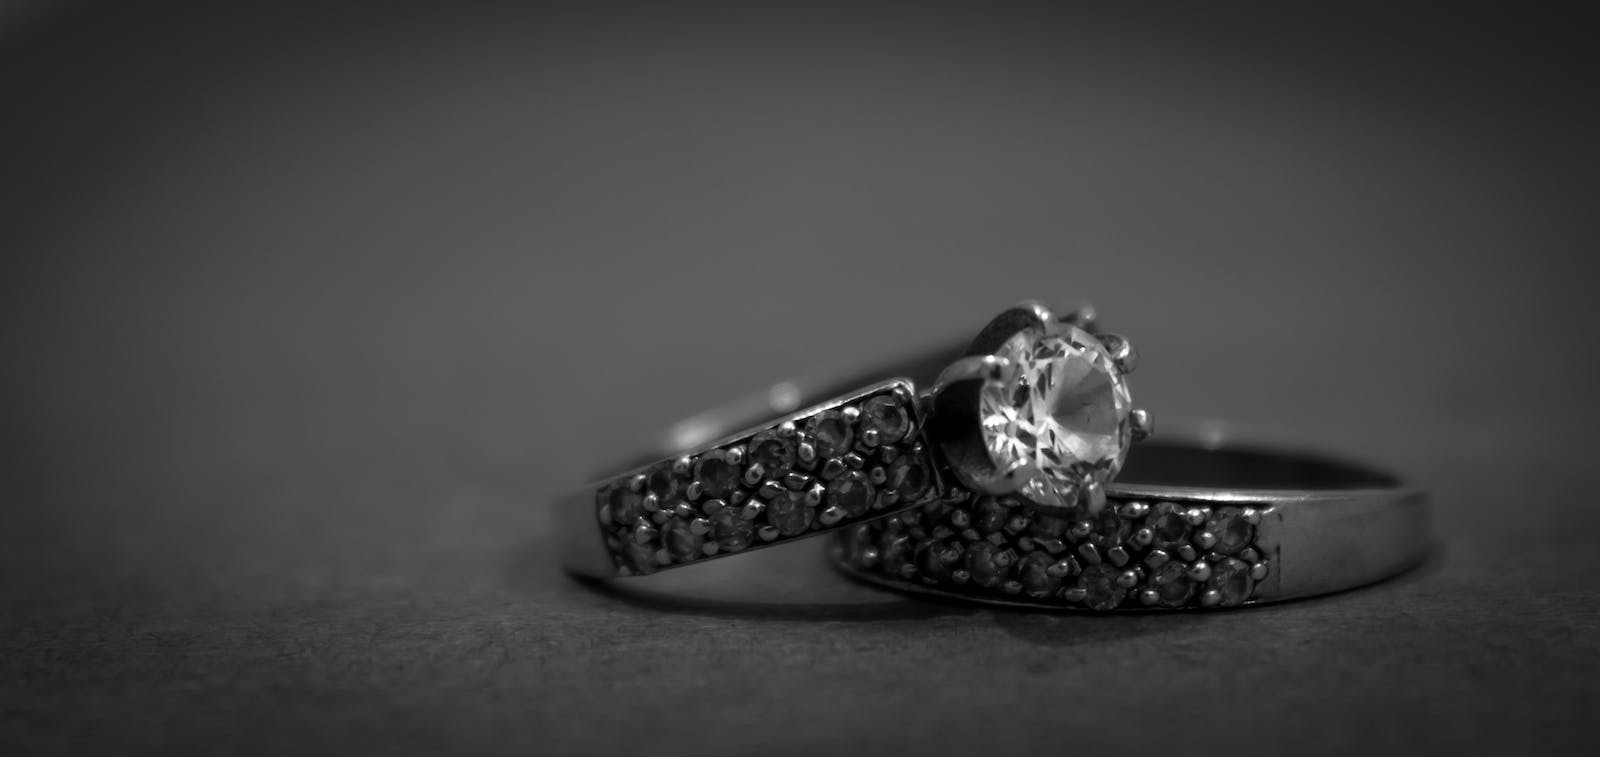 Grayscale Photo of 2 Silver With Diamond Rings